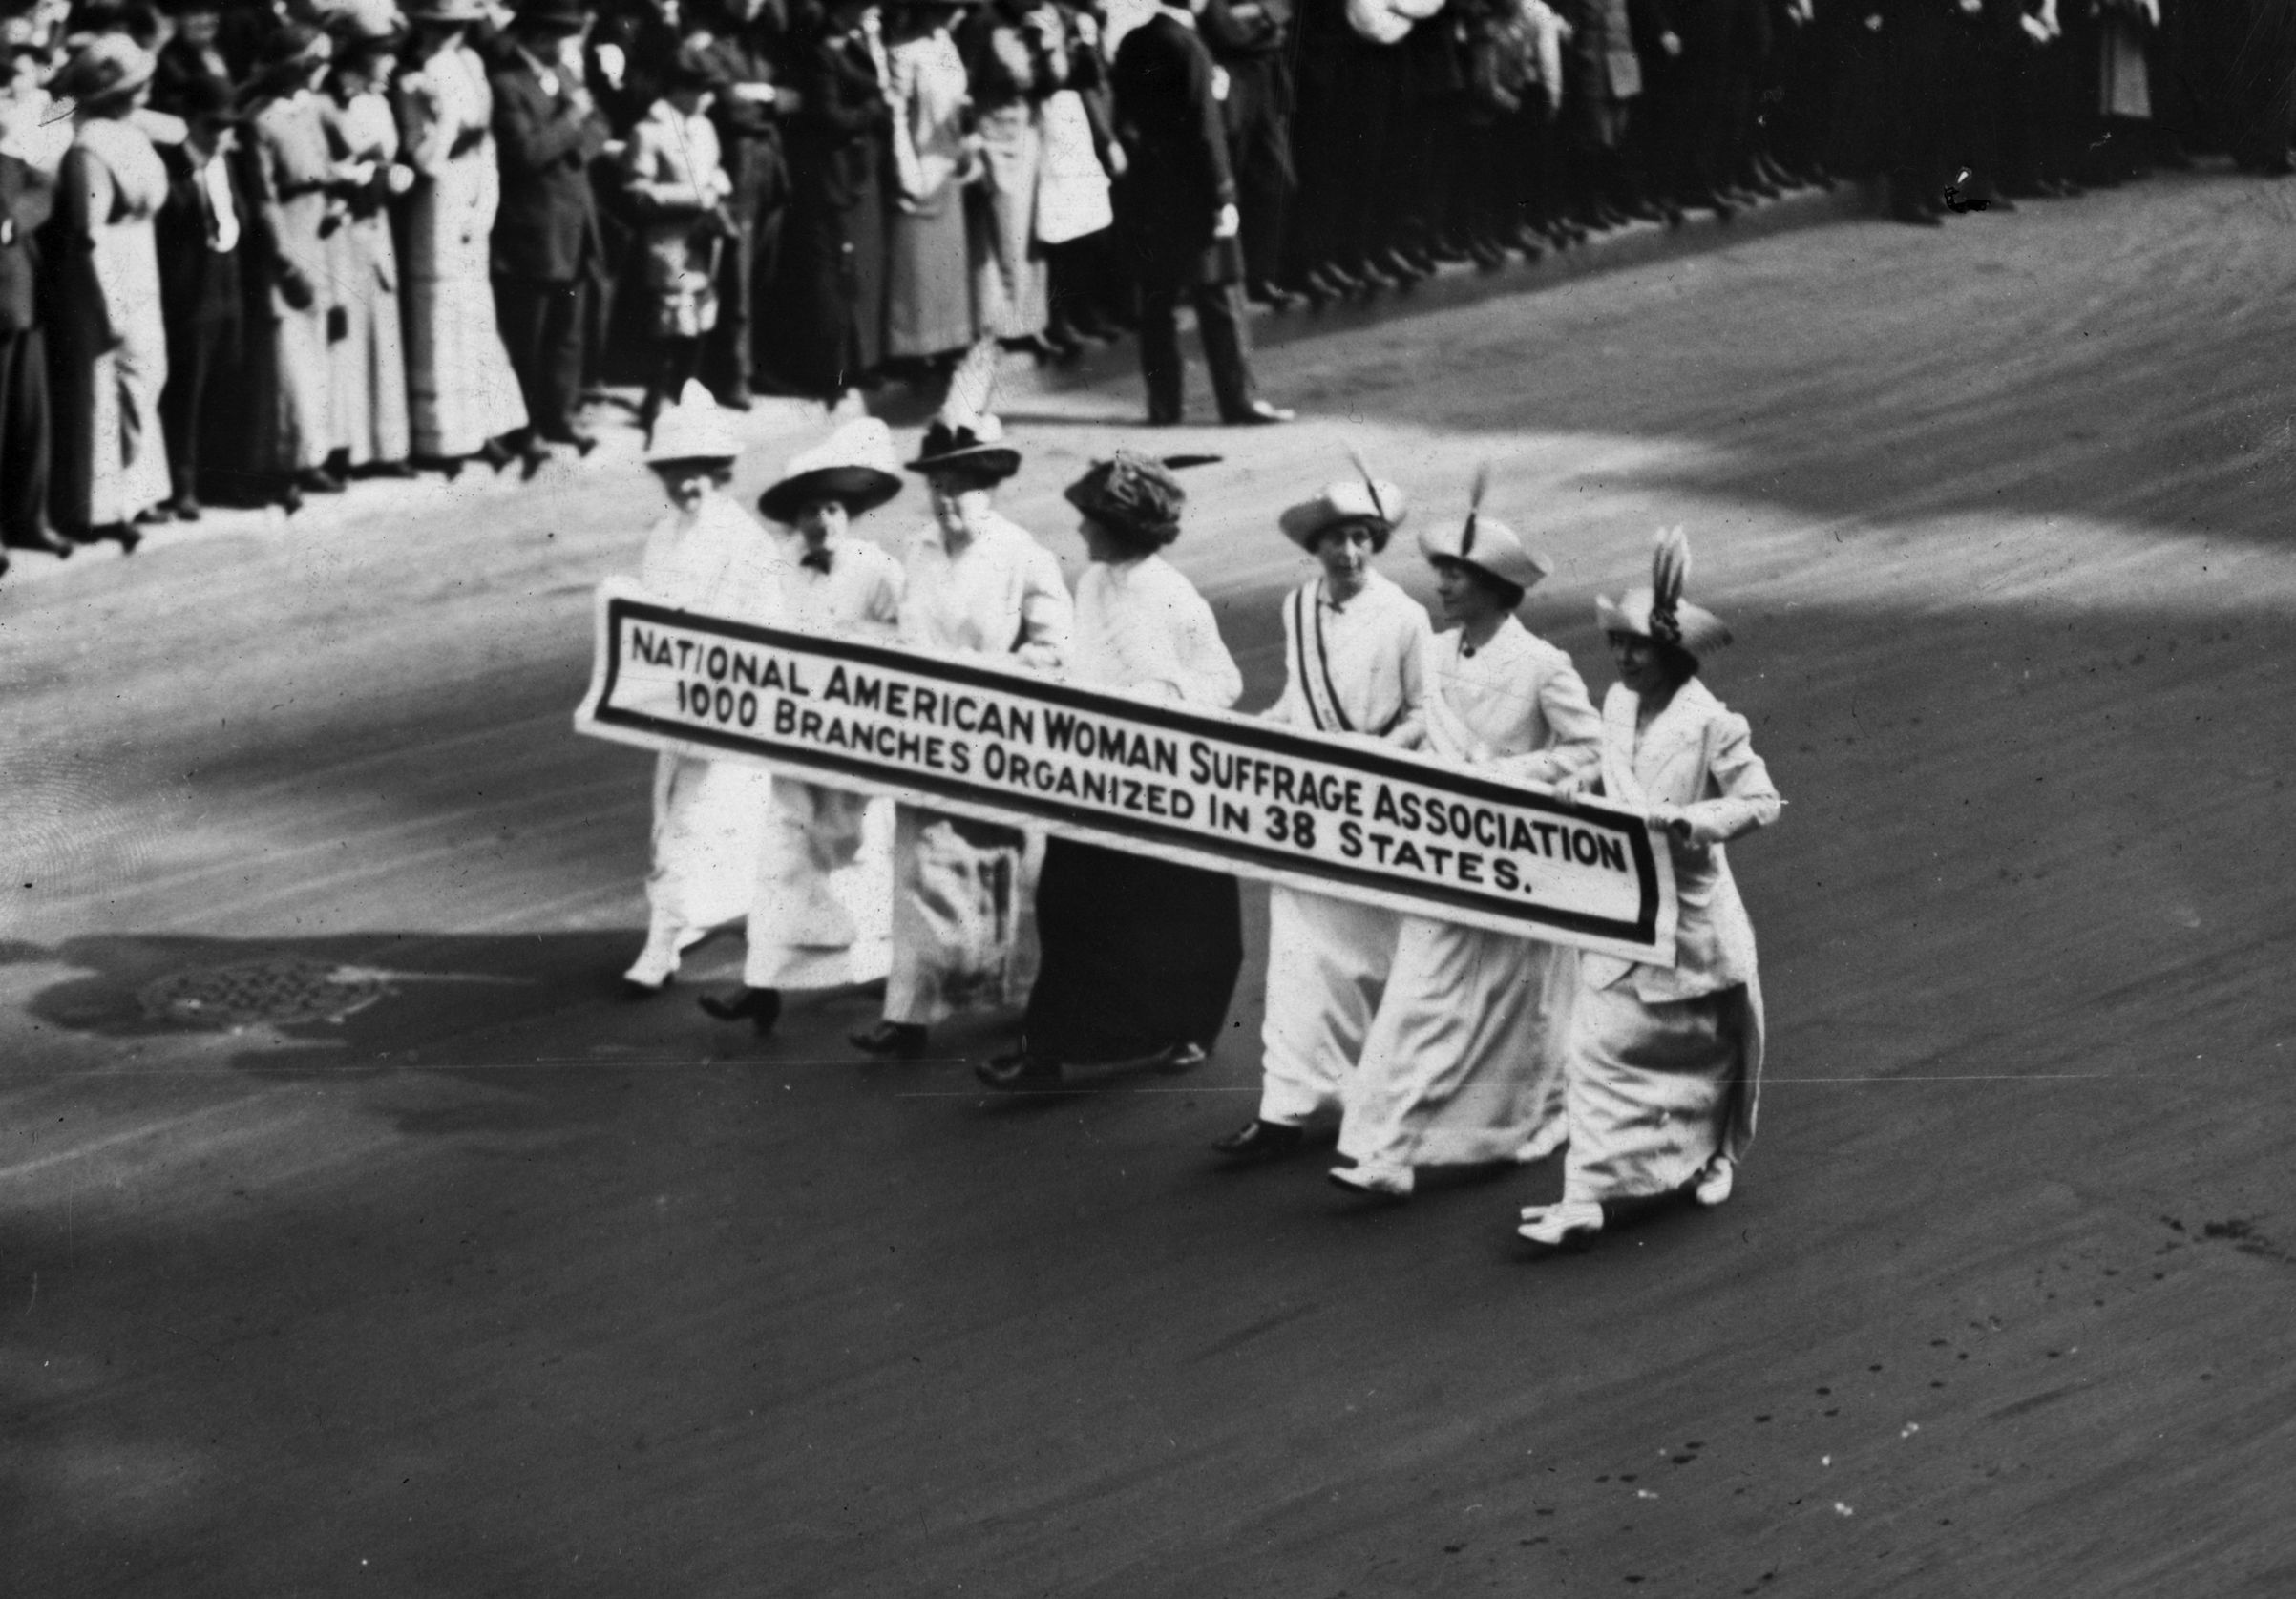 Members of the National American Woman Suffrage Association marching with a banner at the New York Suffragette Parade on May 3, 1913 (Paul Thompson—Getty Images)